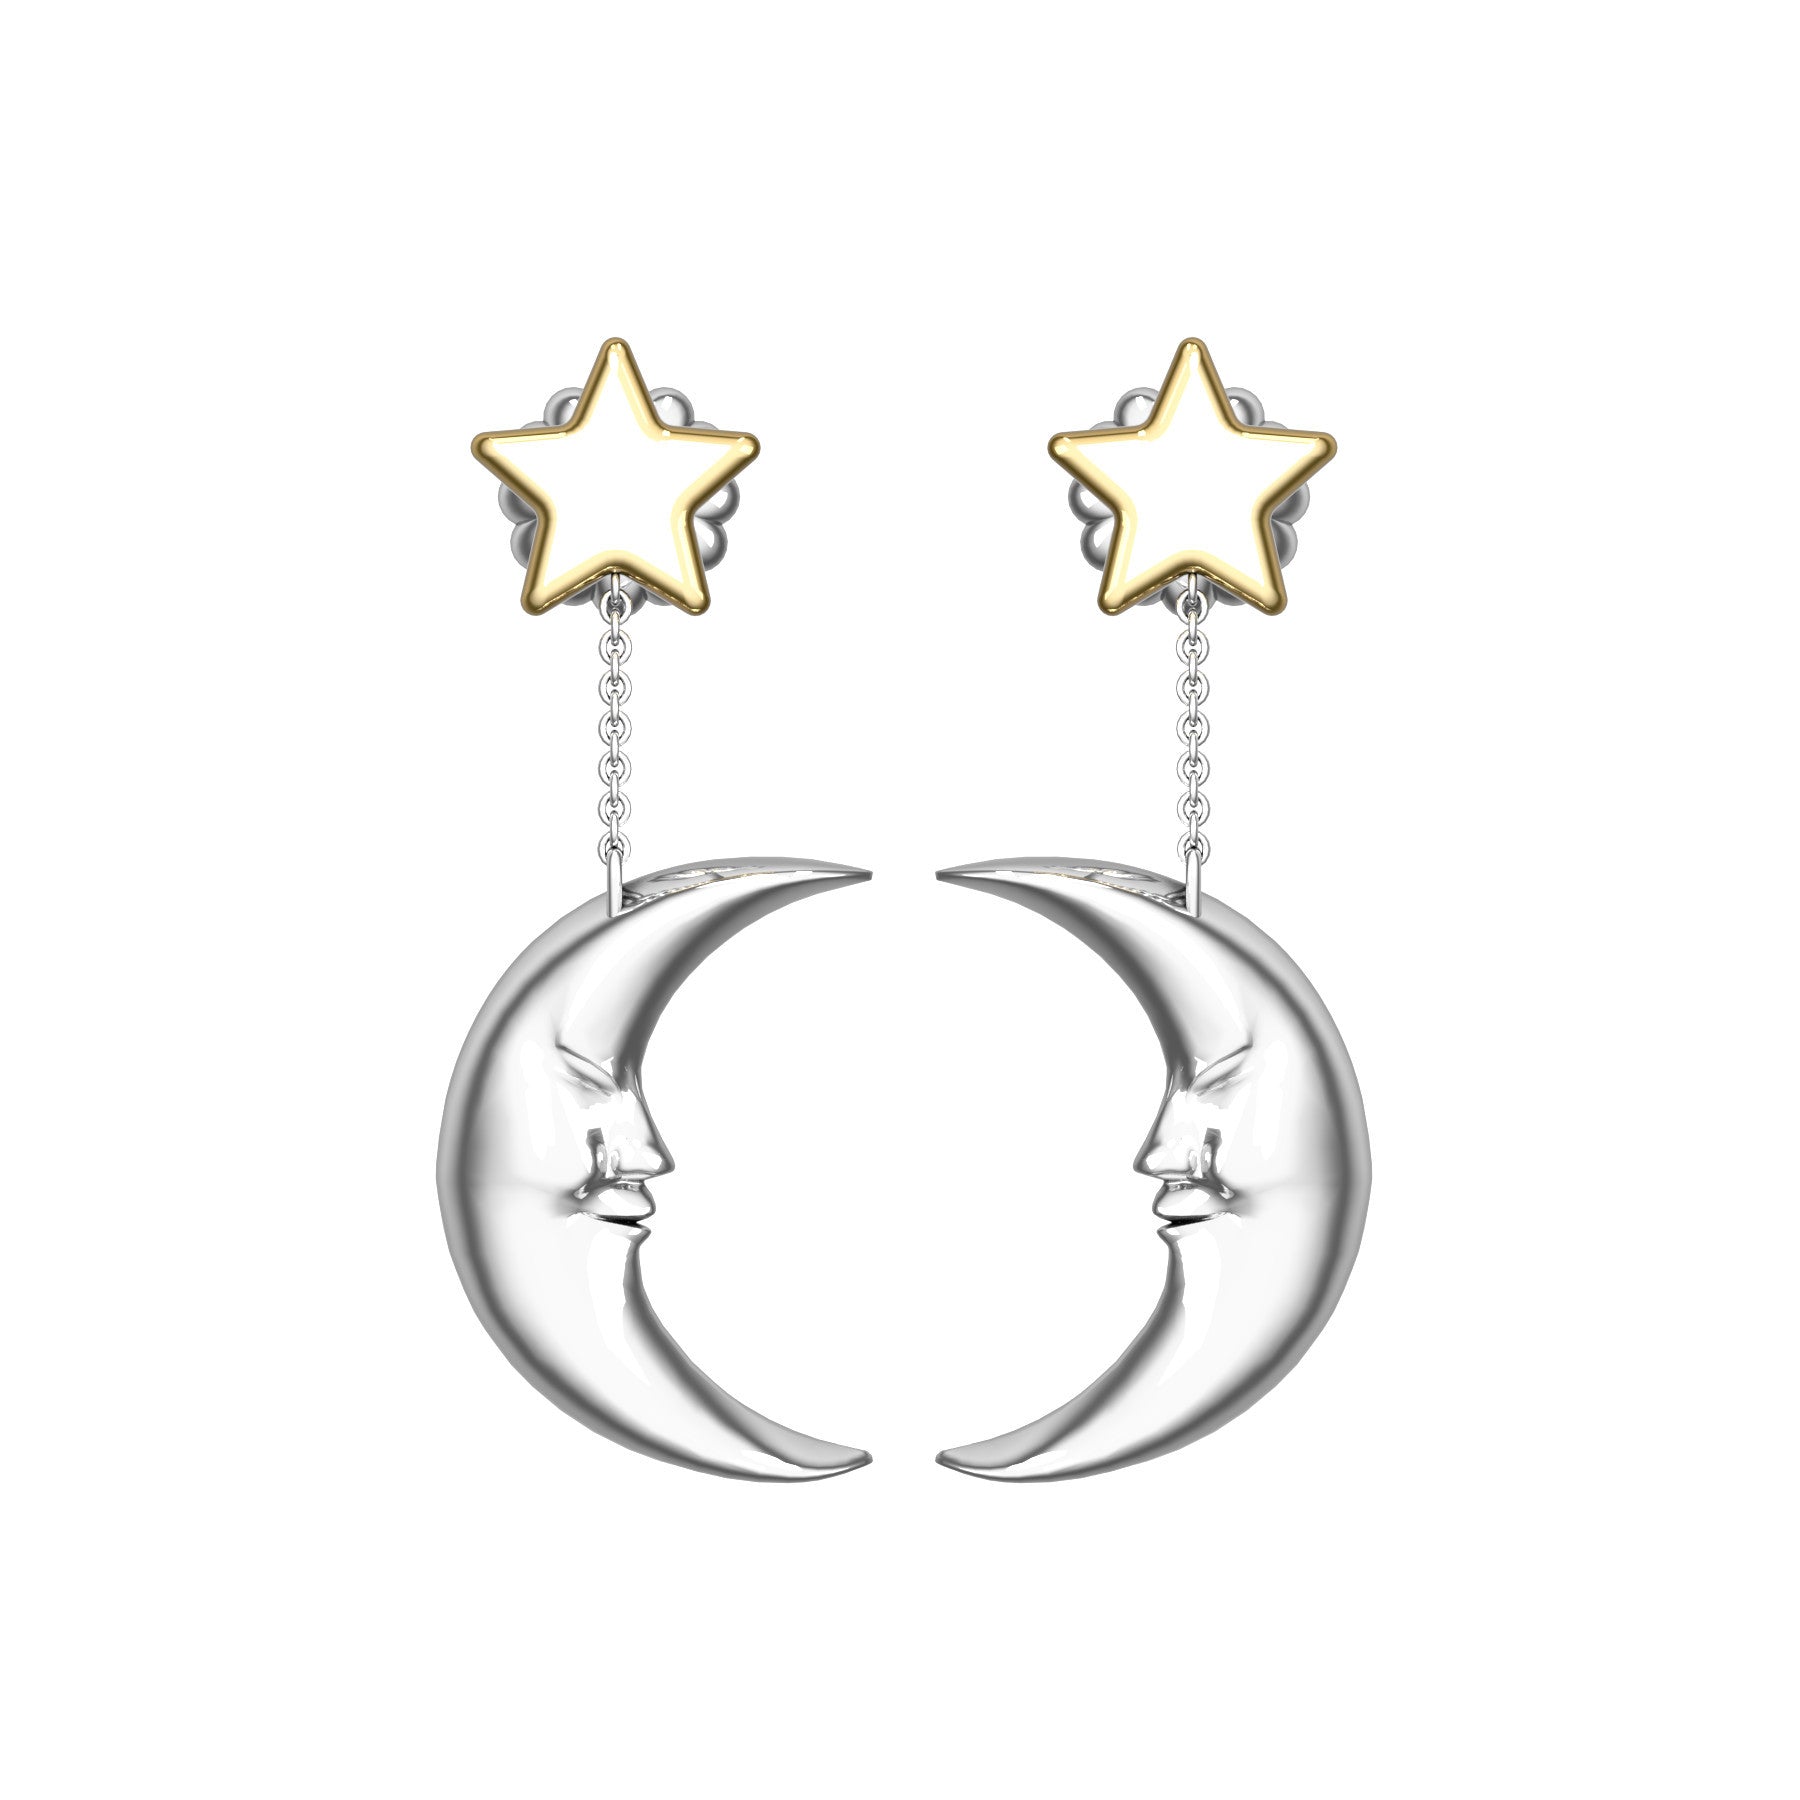 moon earrings, 18 K white and yellow gold, weight about 5,4 g (0.19 oz), length 36,5 mm